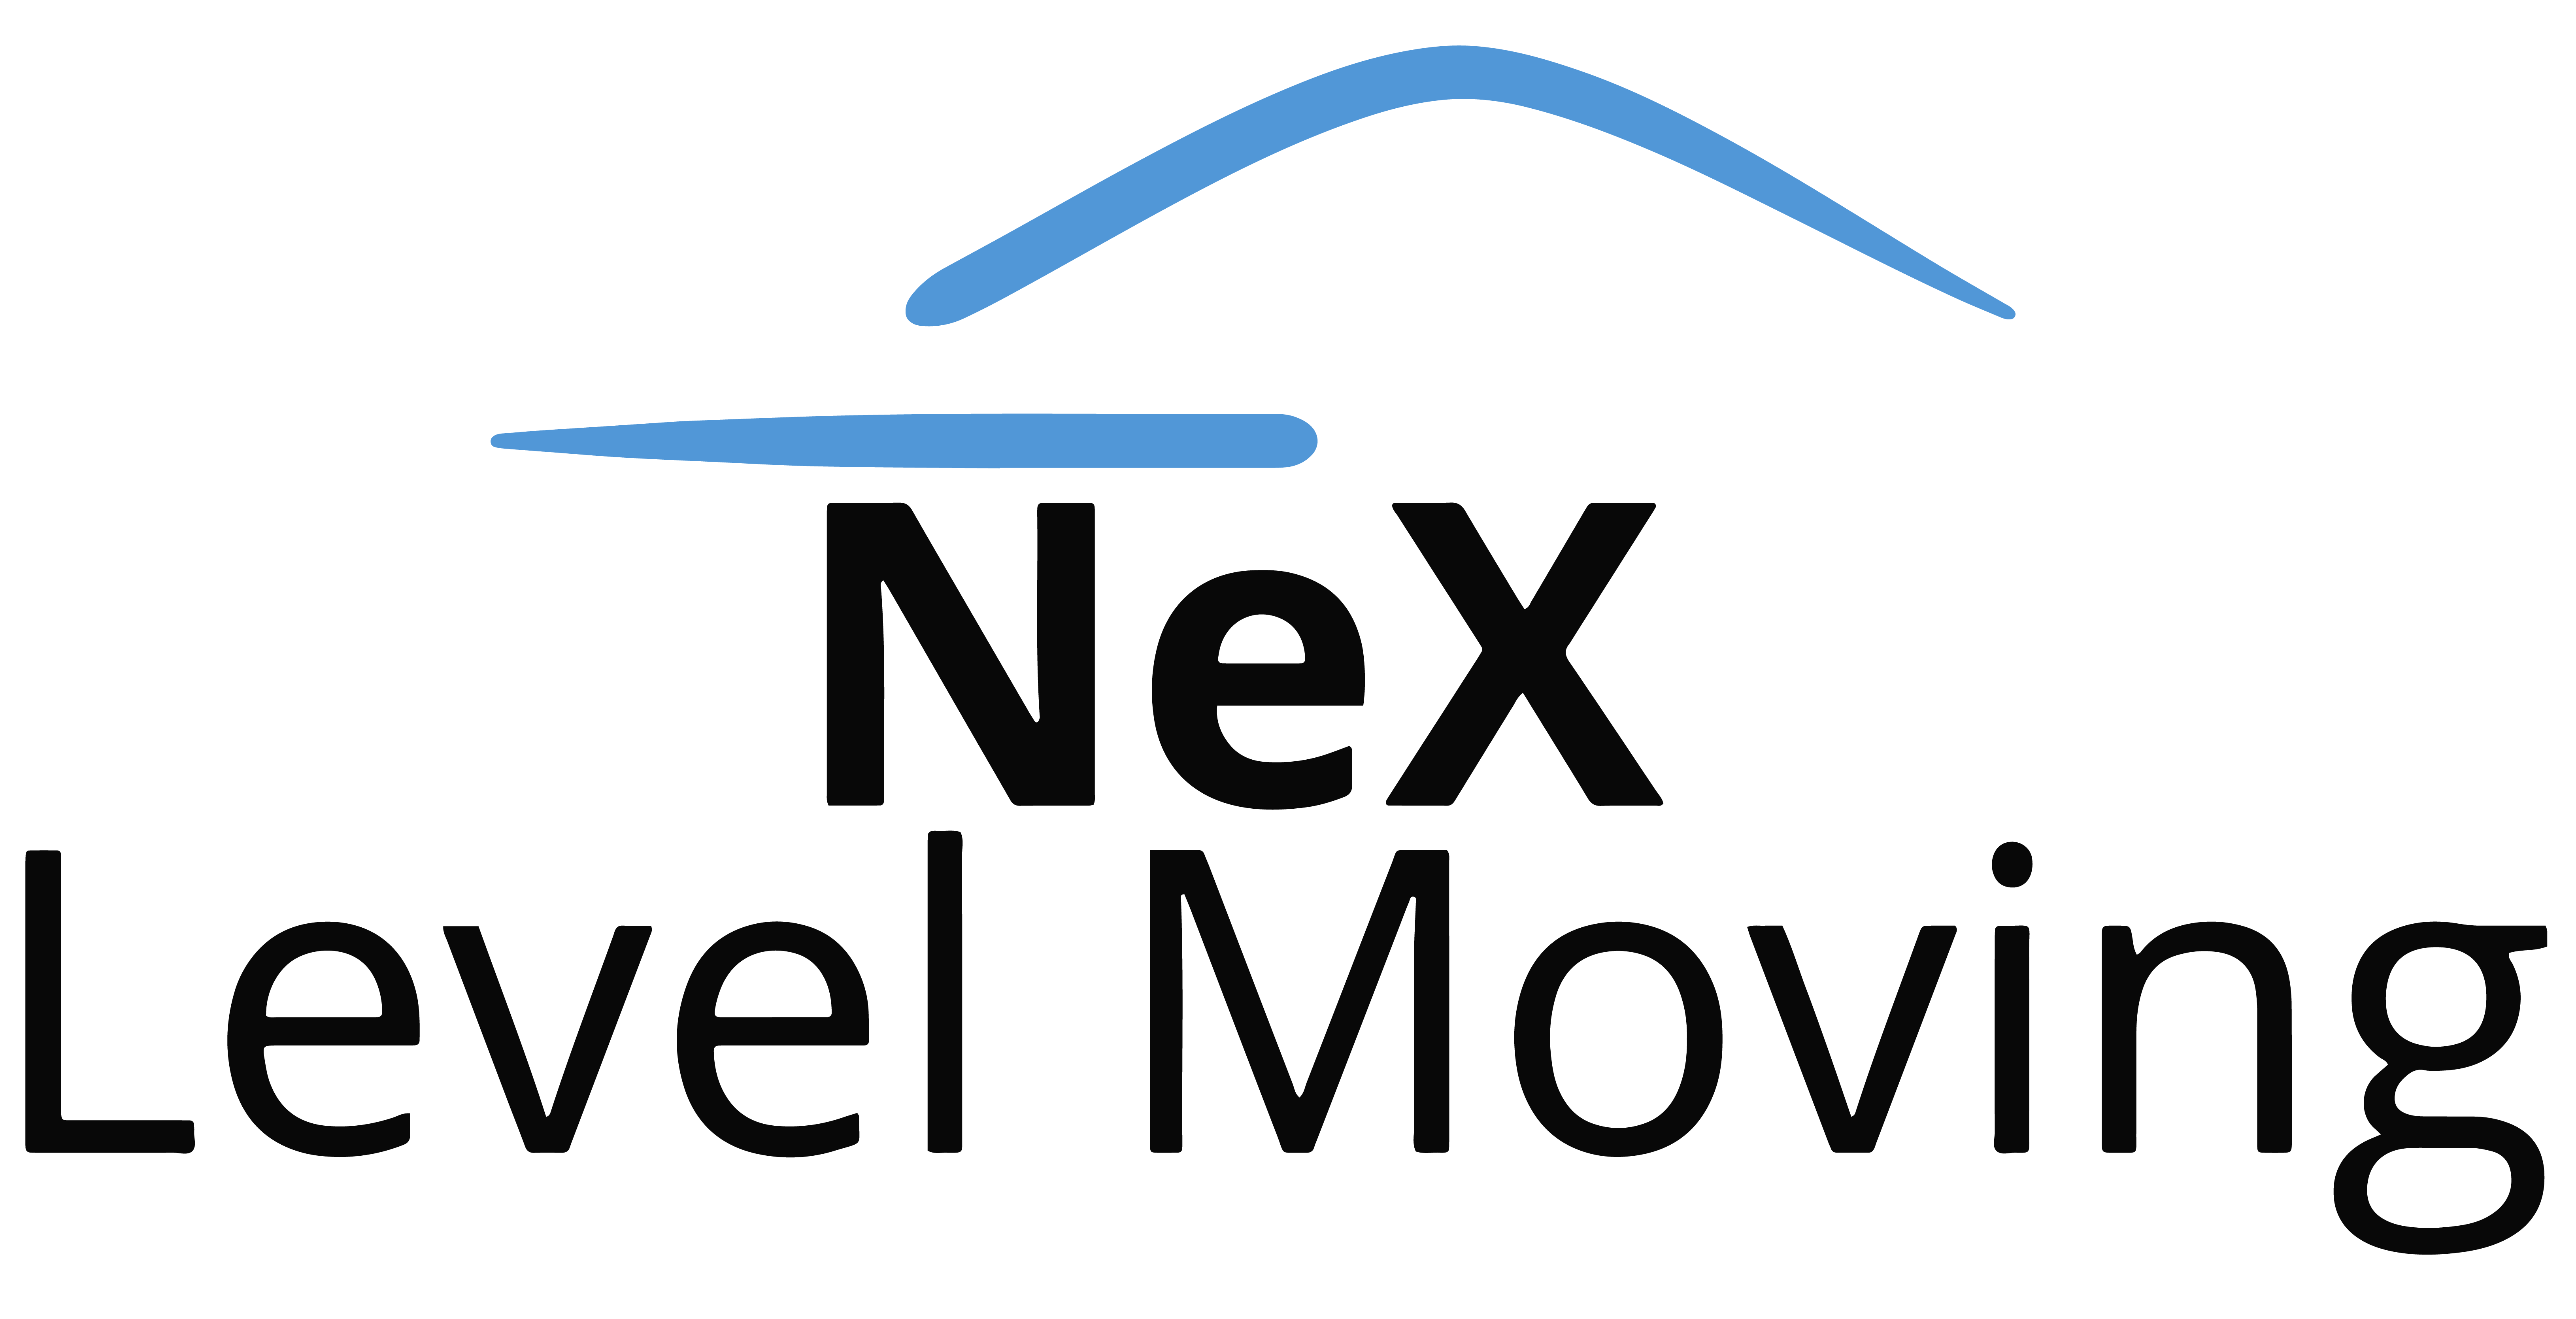 NeX Level Moving Company - Your Relocation Pros